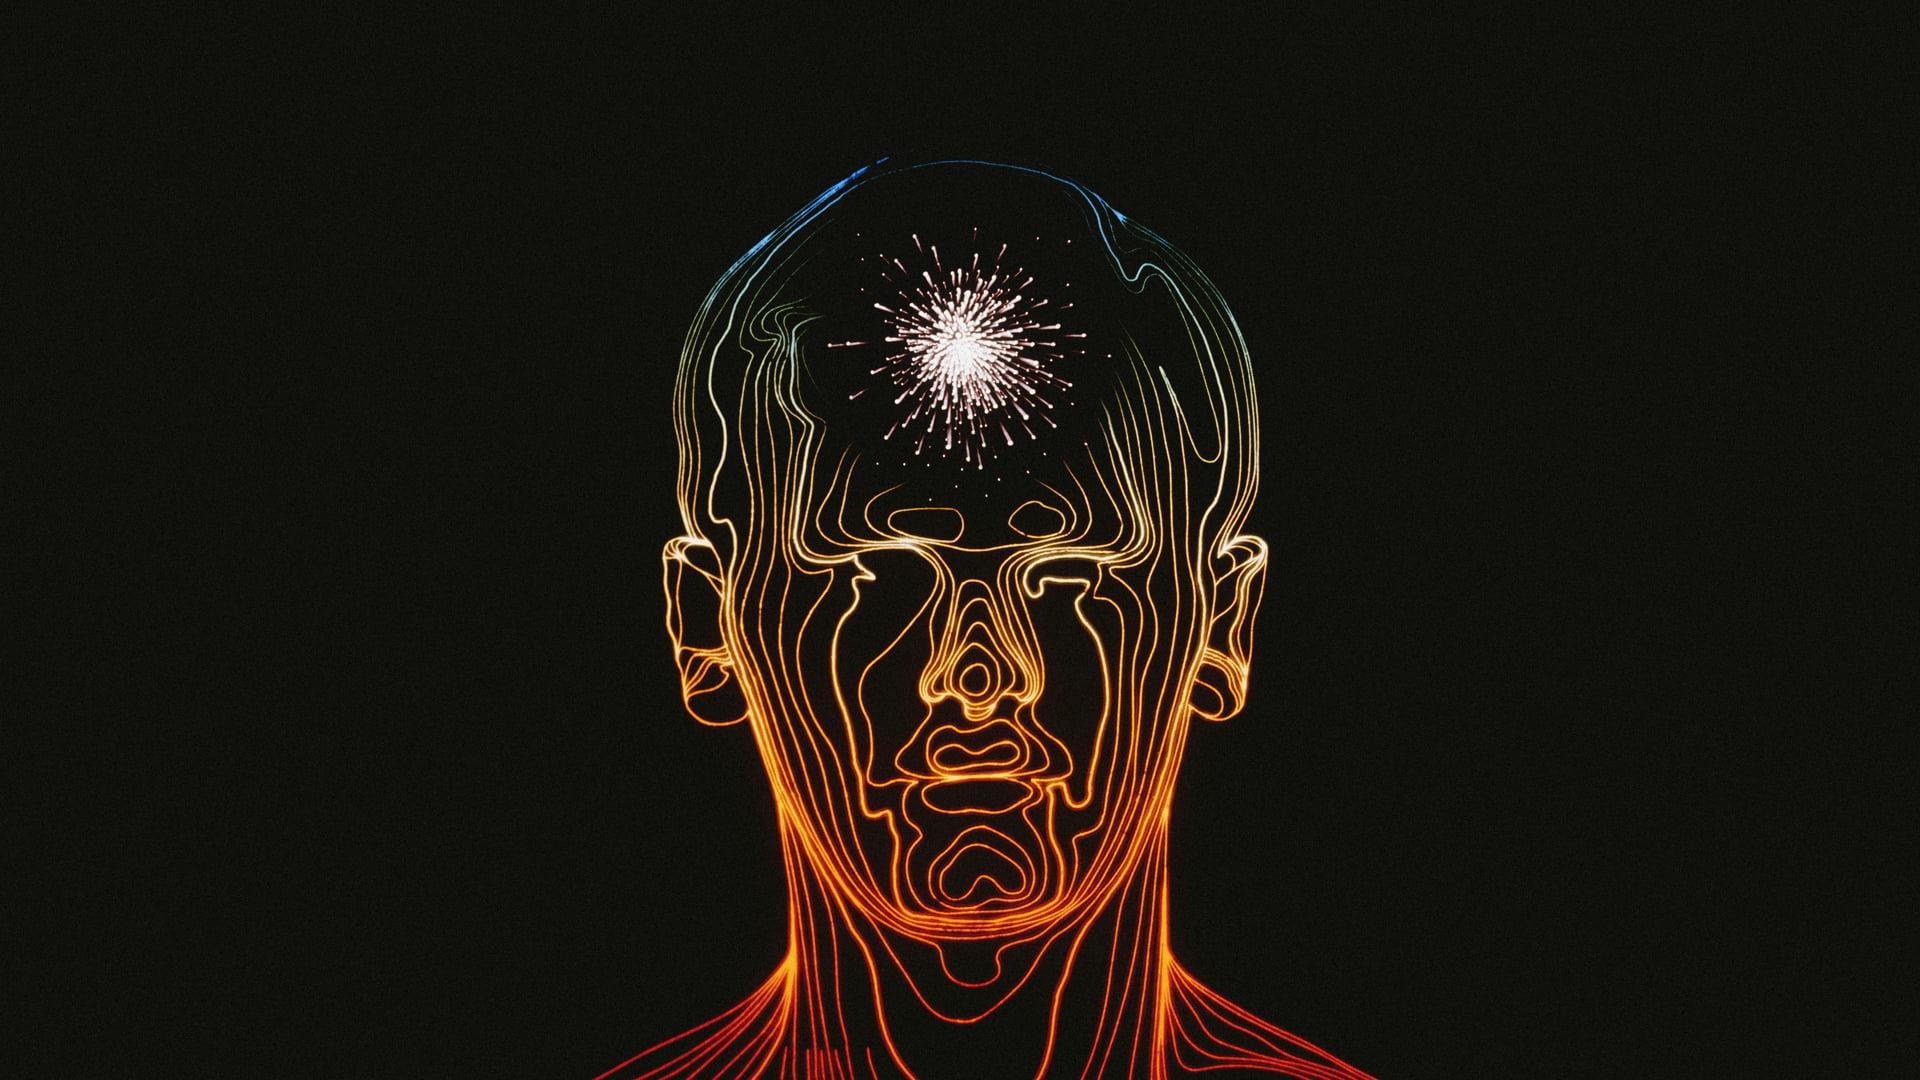 100,000 The subconscious mind Vector Images | Depositphotos